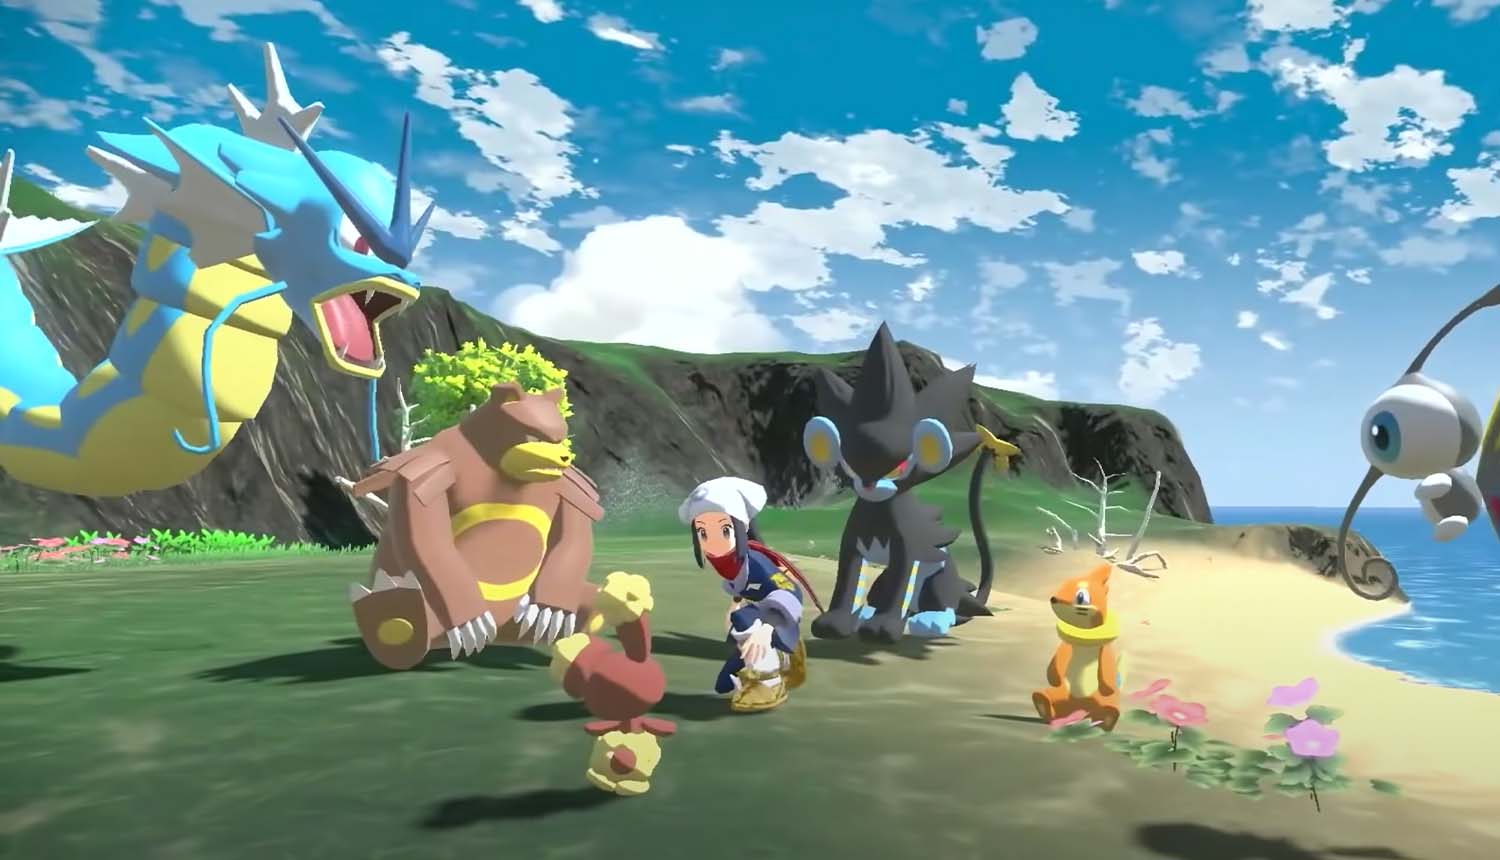 Pokémon Legends: Arceus' Reviews Are In, And They Are Good